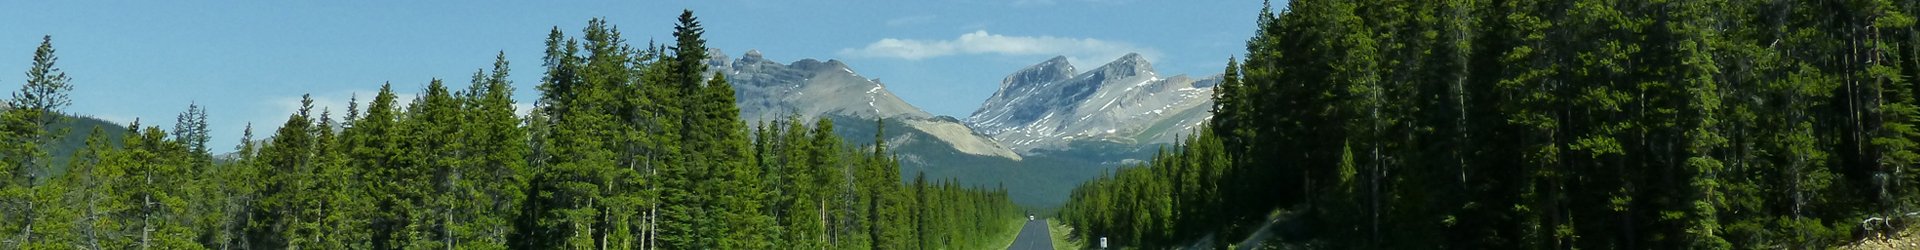 Icefield Parkway, Canada